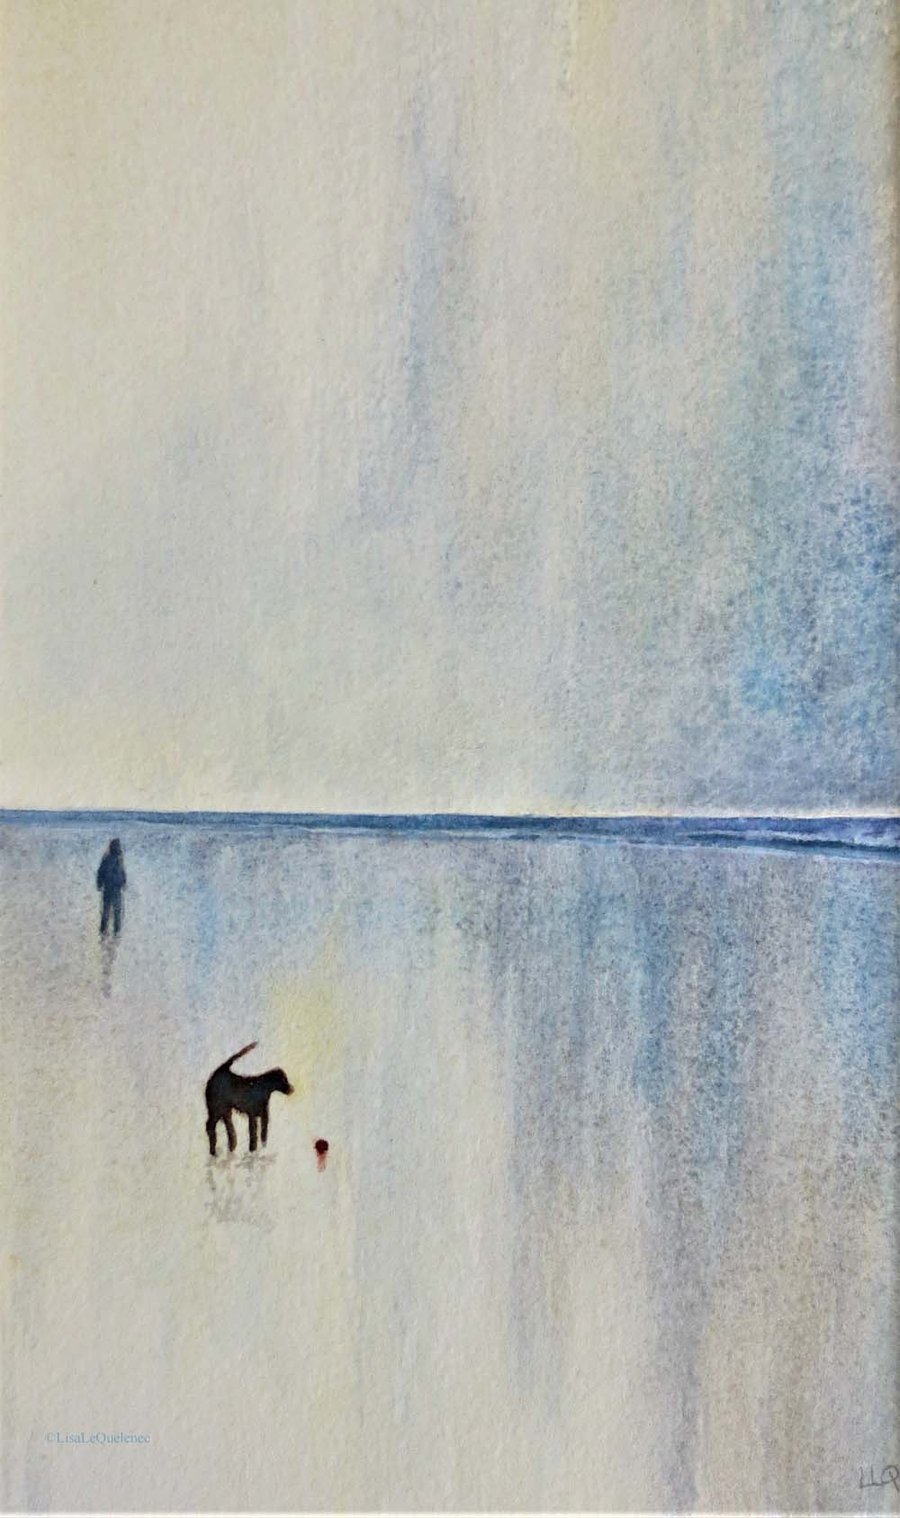 The red ball, original painting walking the dog at the beach at sunset